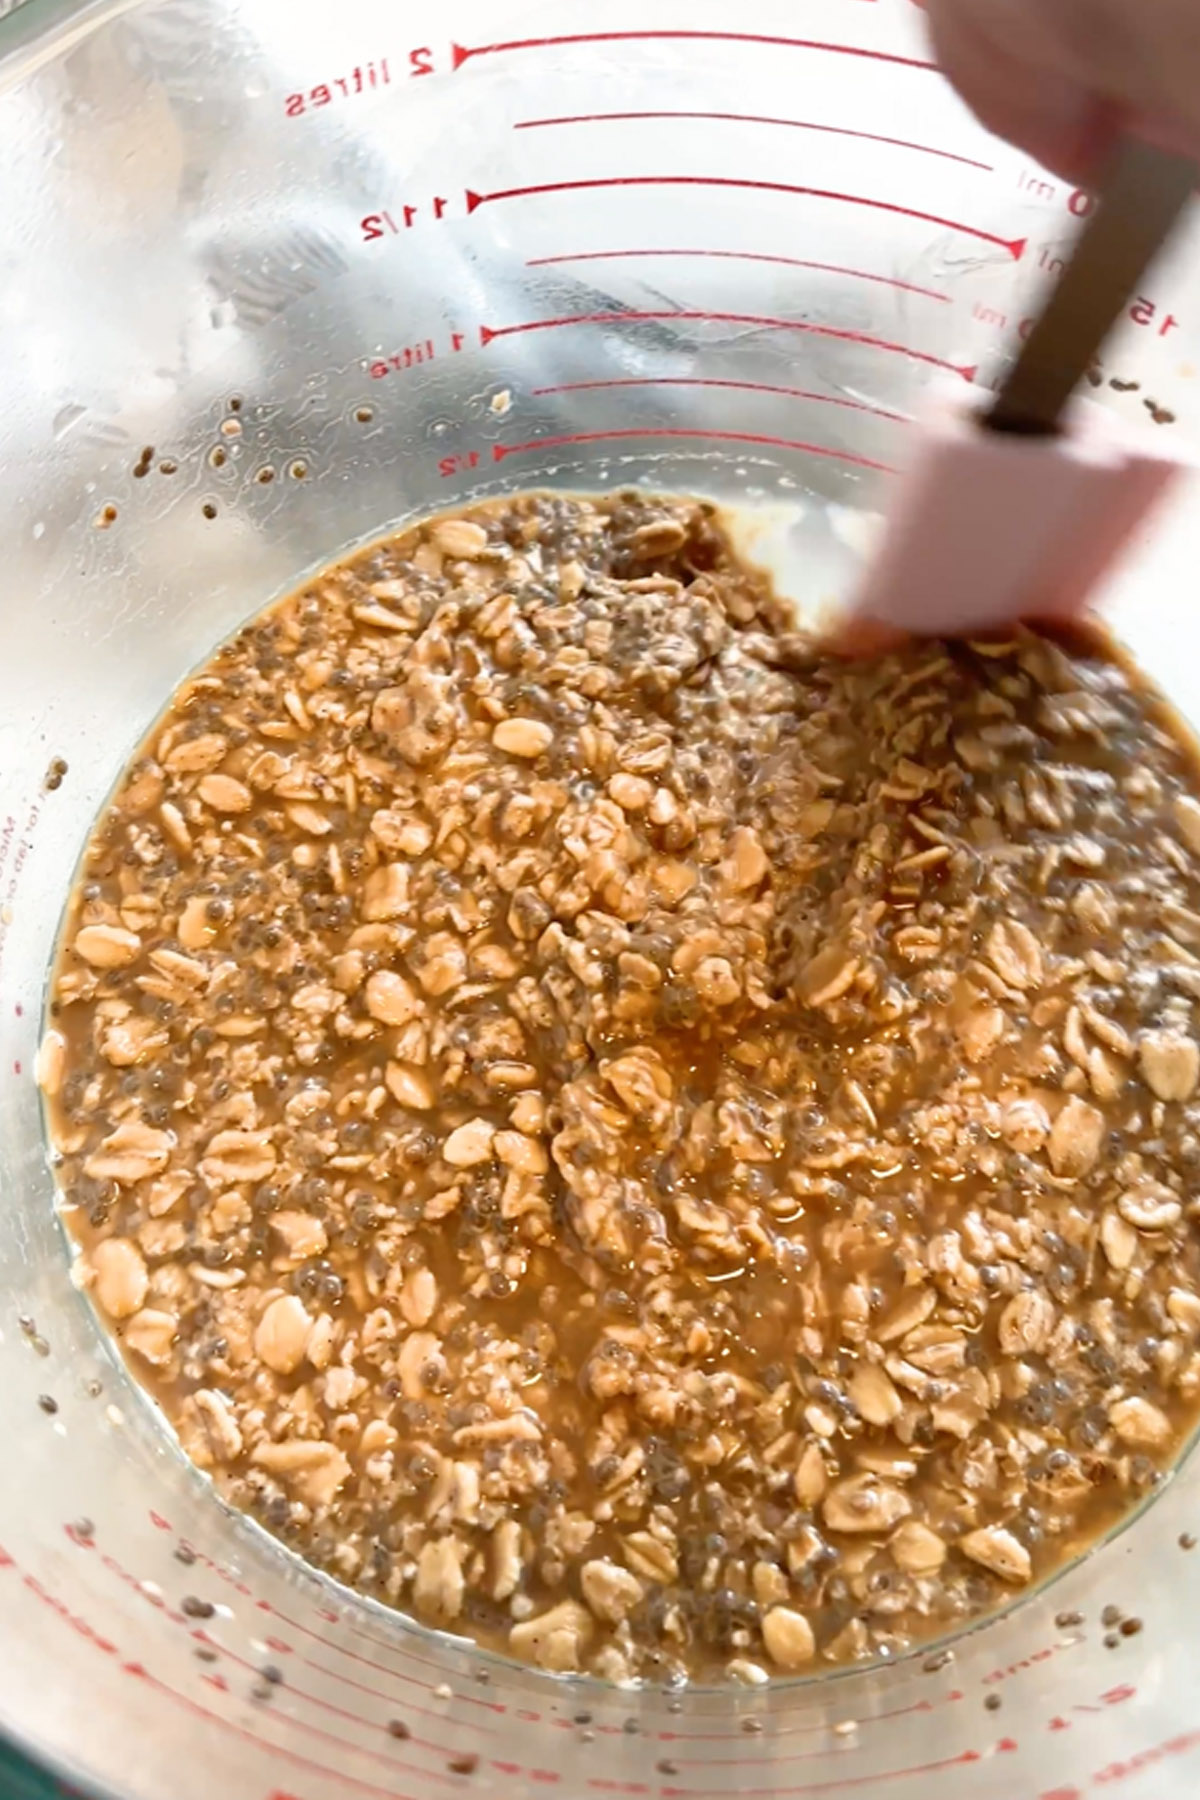 A thick oat mixture is stirred in a large glass measuring cup.